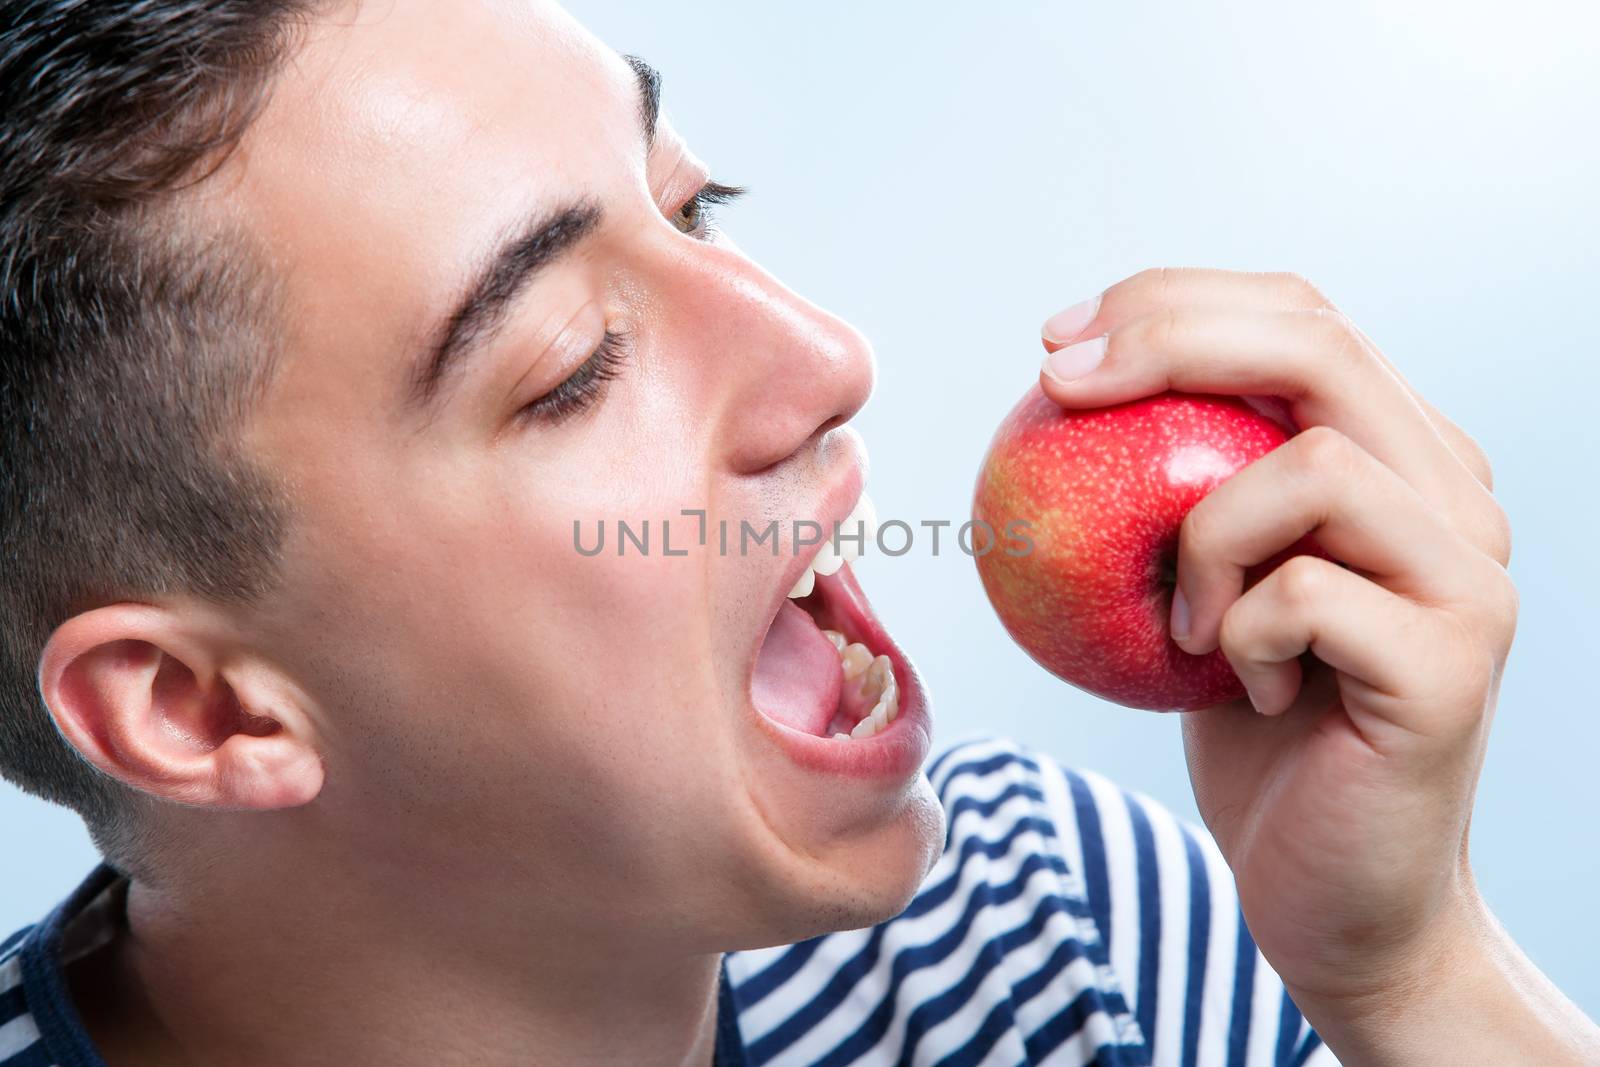 Extreme close up of male teenager about to bite a red apple.